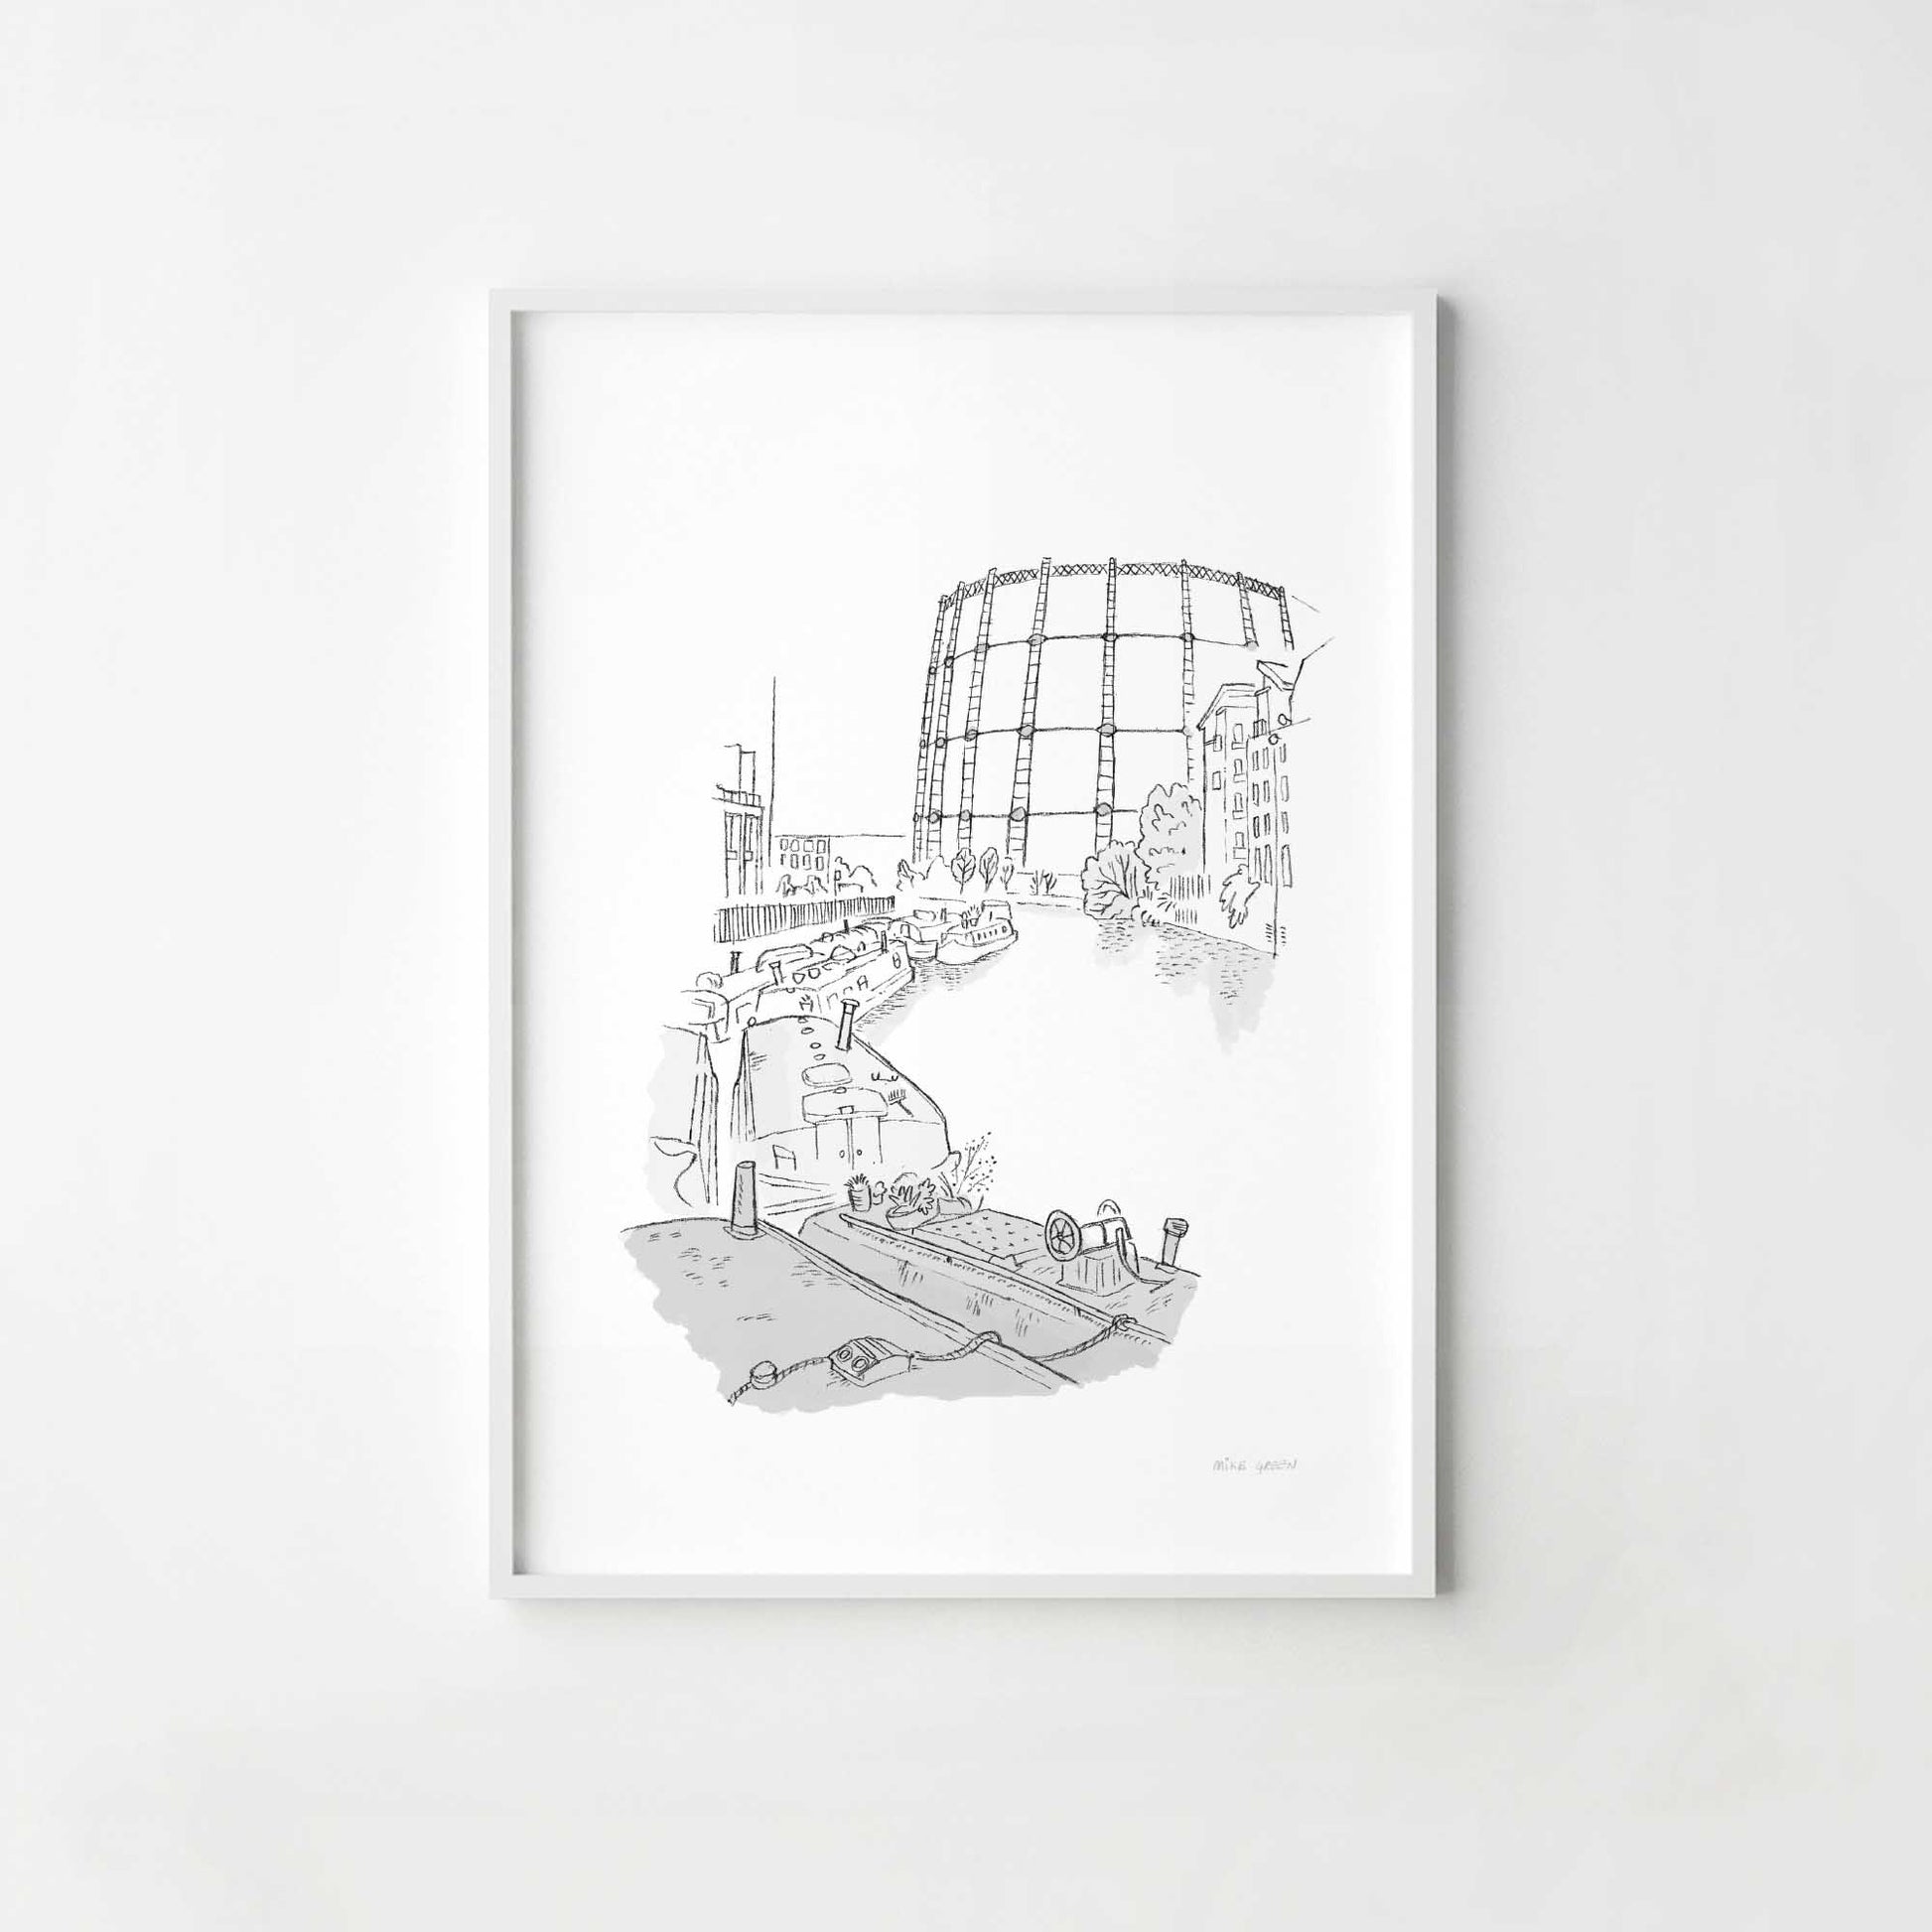 A print of boats on London's Regents Canal beautifully sketched by Mike Green.